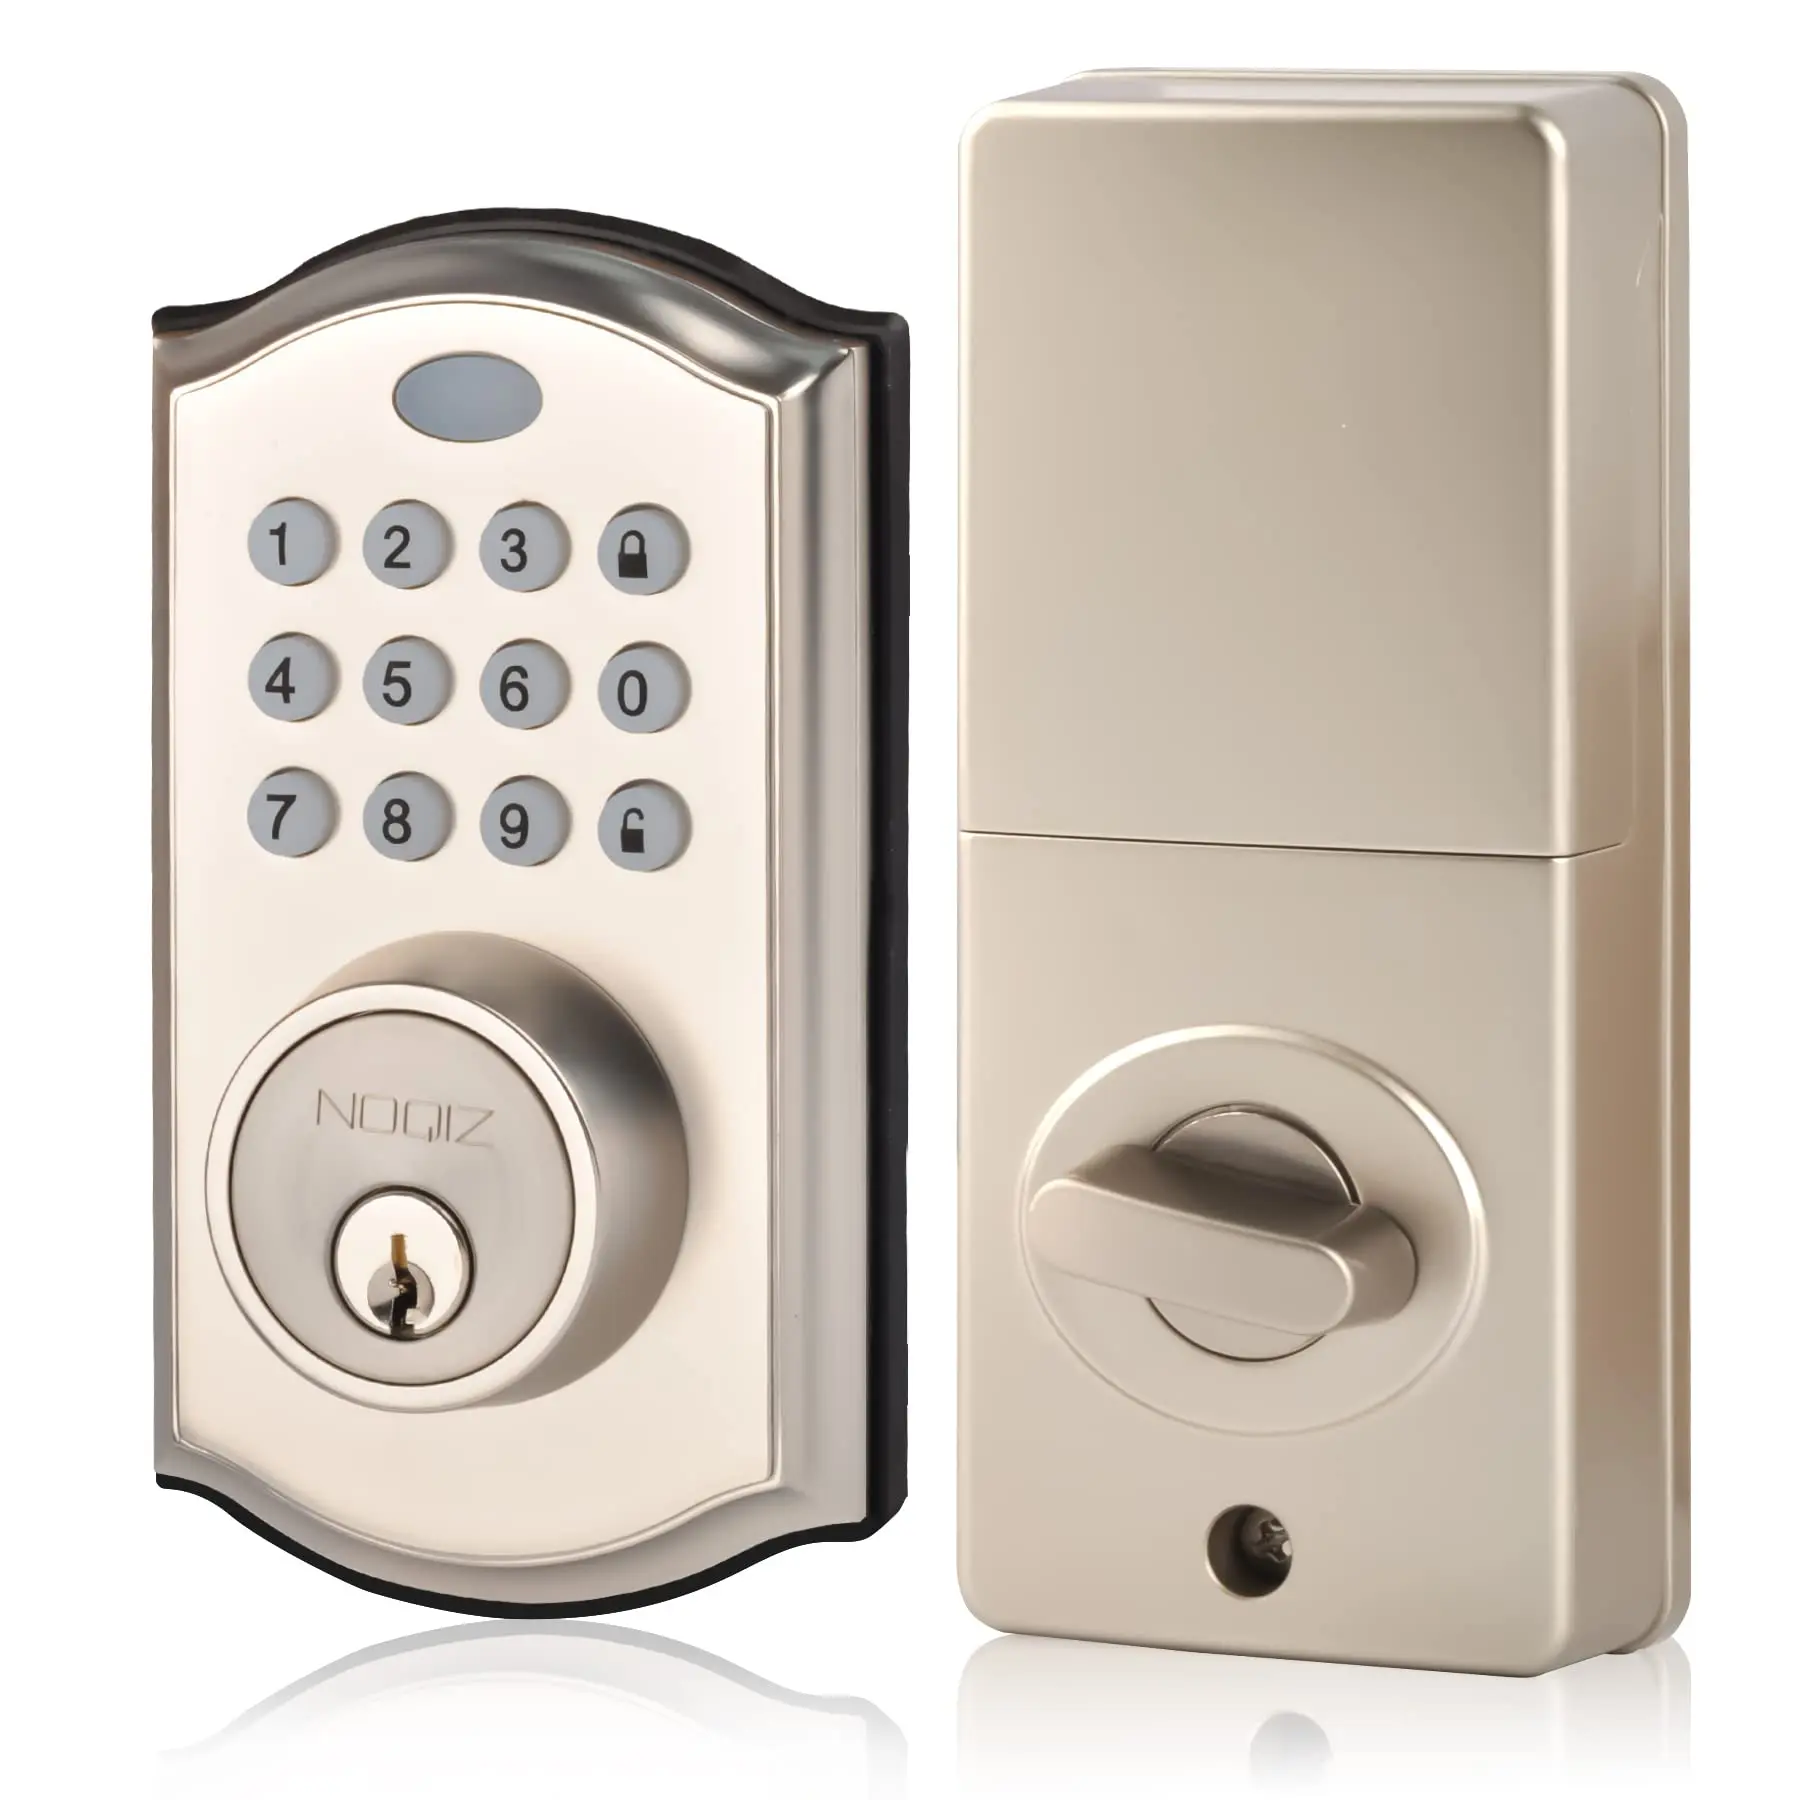 WiFi Smart Lock, Keyless Entry Door Lock with Touchscreen Keypad, Remotely  Control, Easy to Install, WI-FI ＆ Bluetooth Electronic Deadbolt Works with  錠、ロック、かぎ